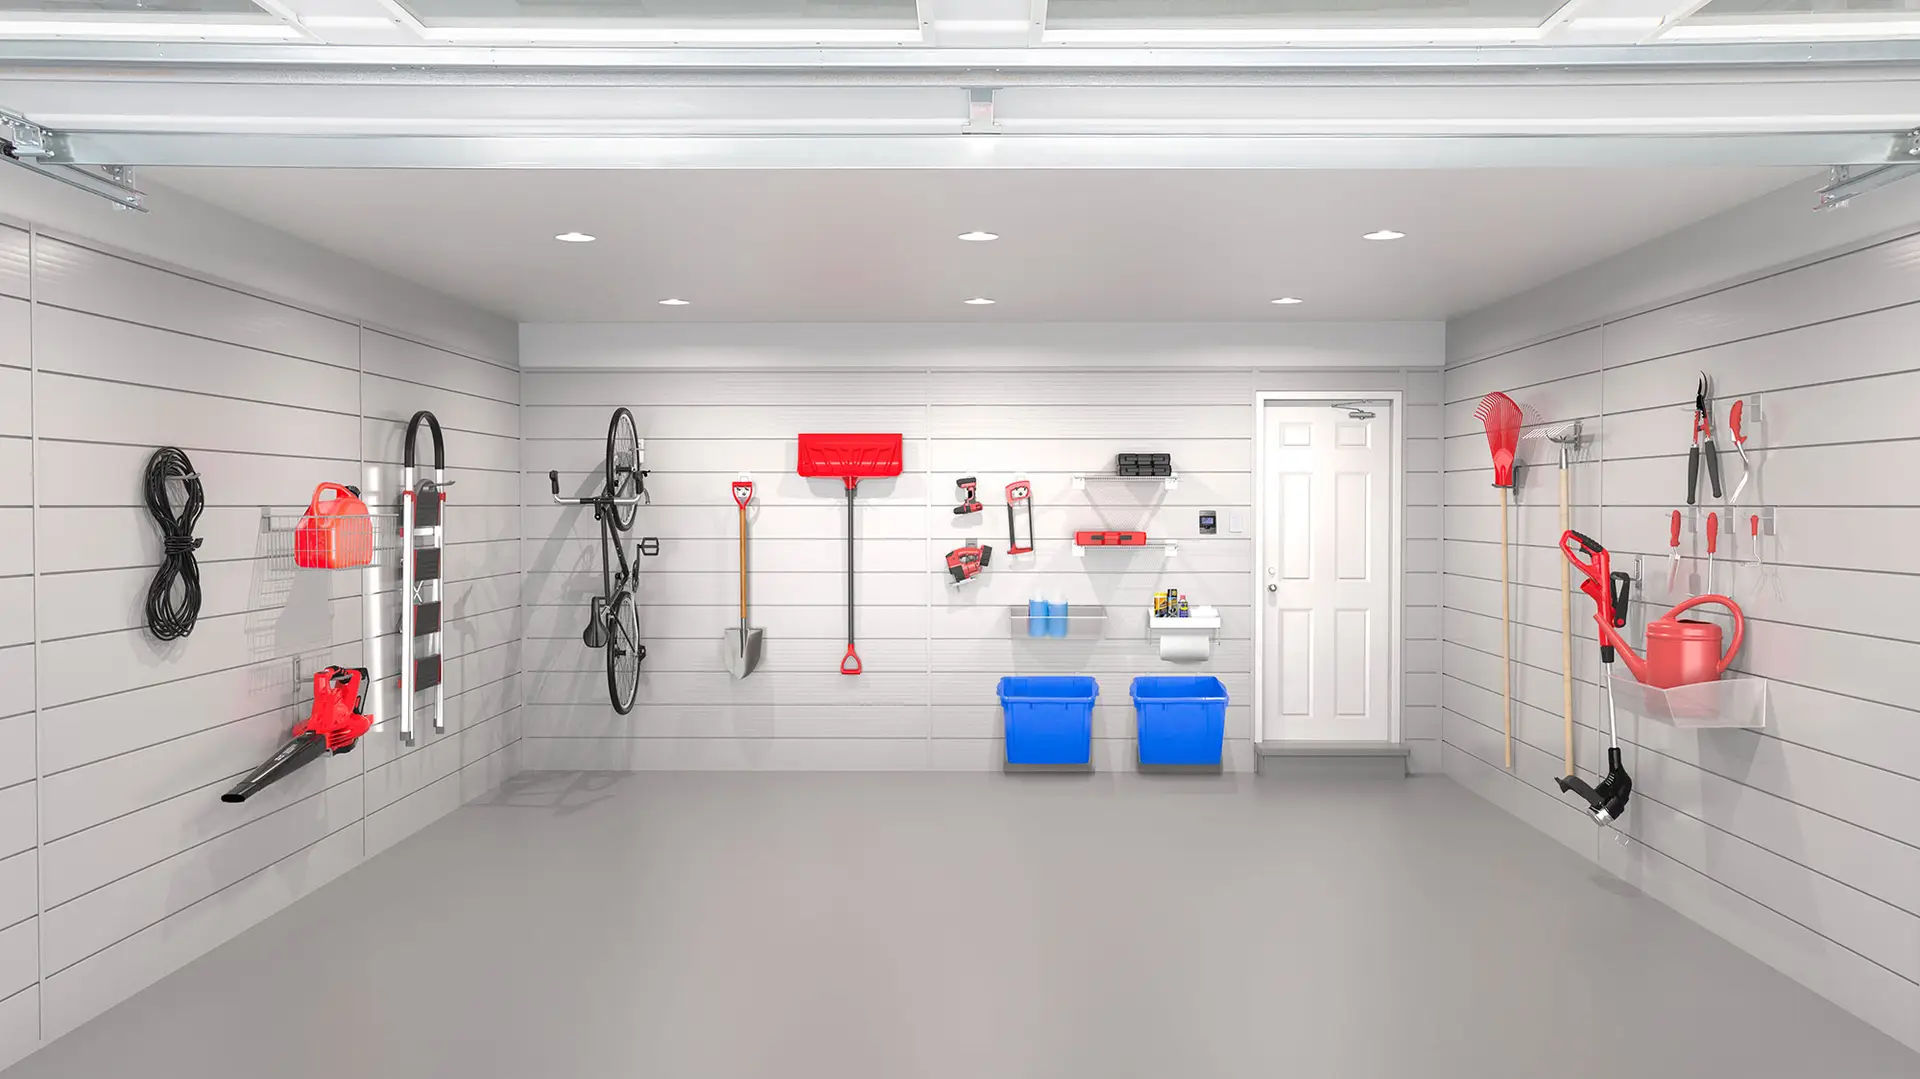 A well-organized garage interior with wall-mounted storage solutions. Various tools, including a shovel, rake, and garden hose, are neatly hung. Two blue bins are placed under a shelf, and a bicycle is mounted on the wall. The white door is seen at the back.